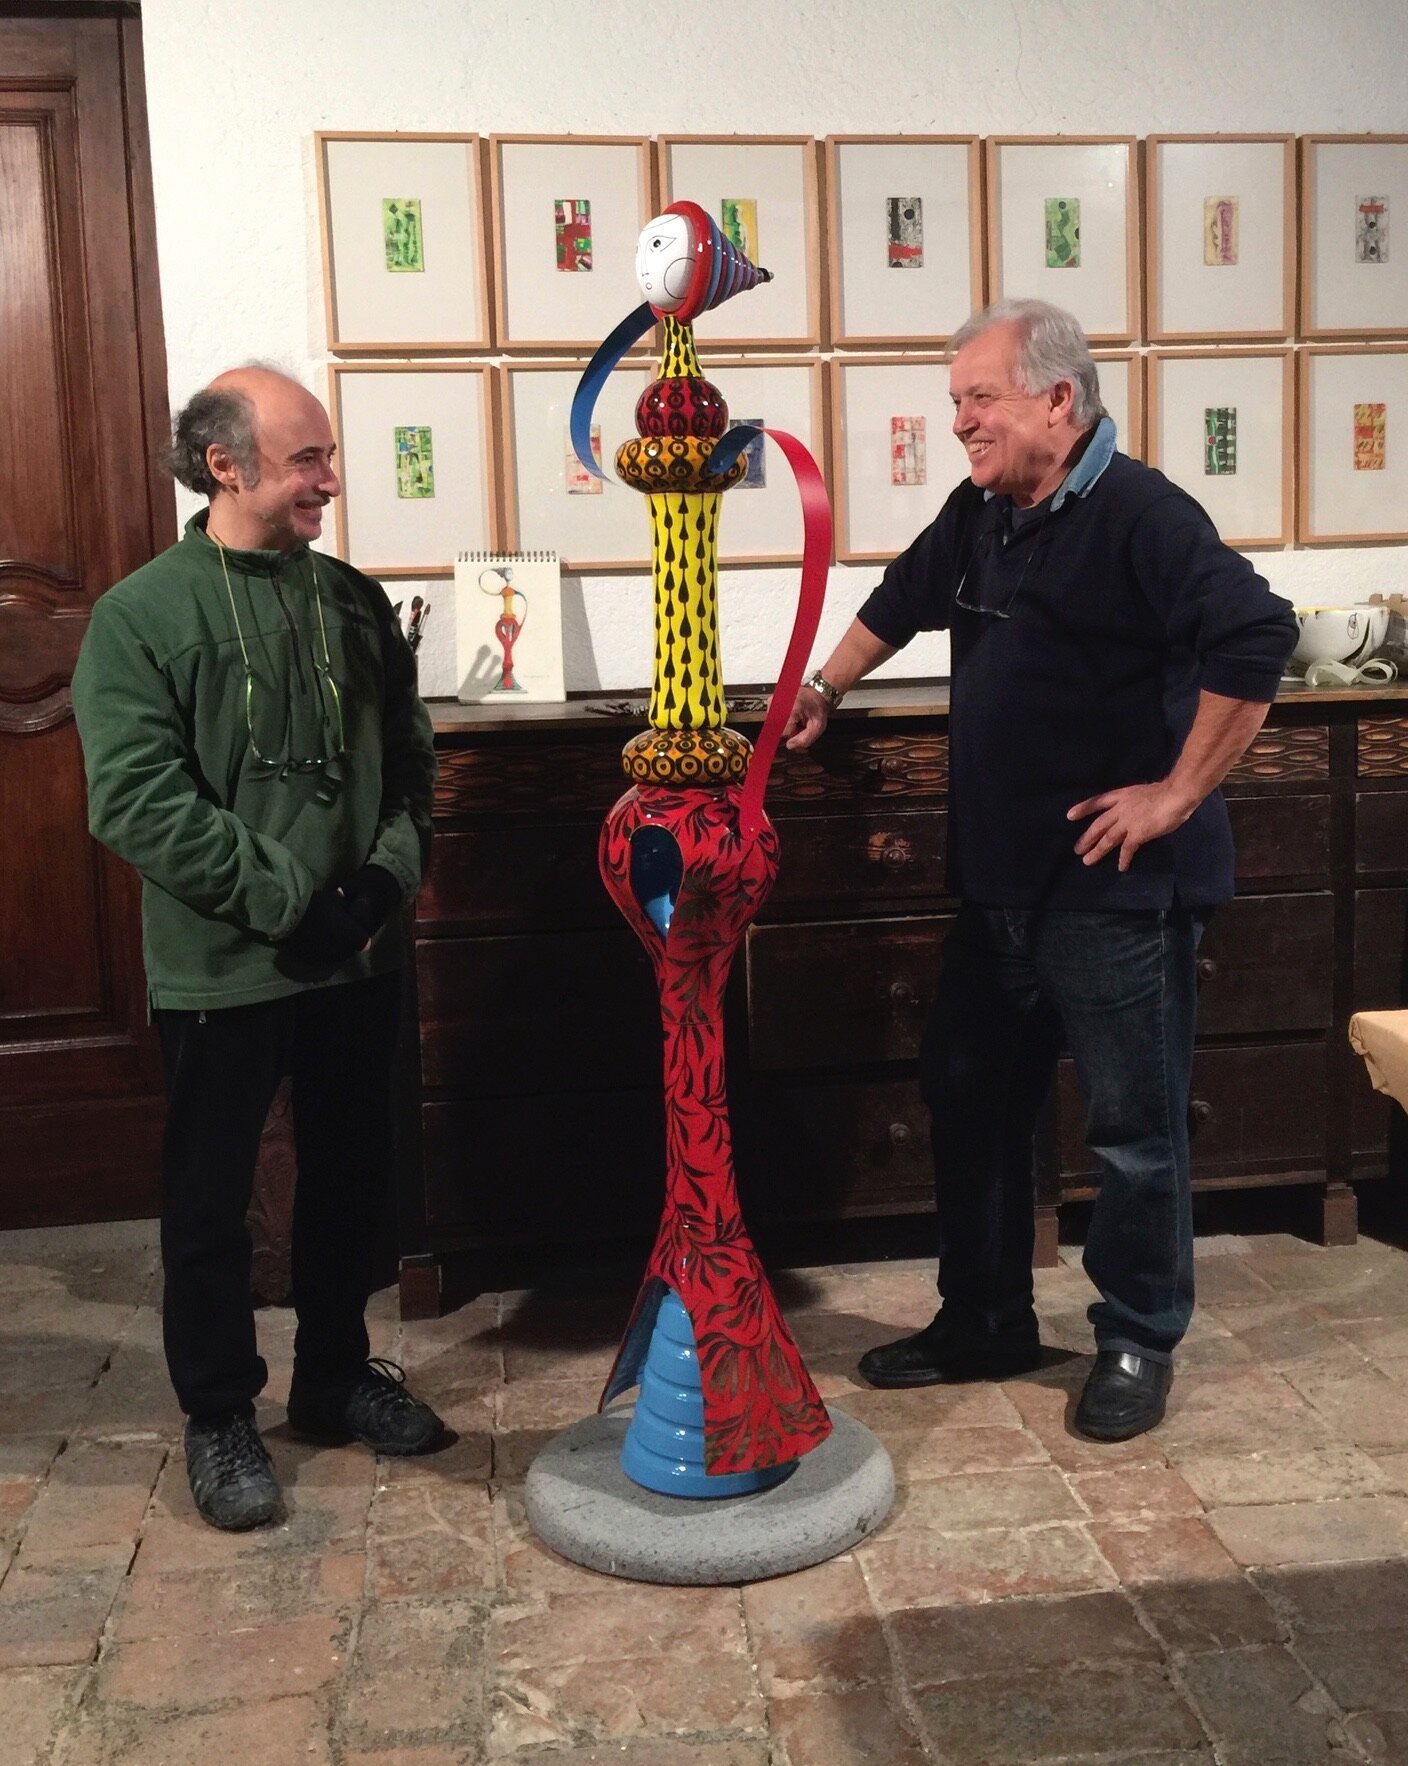  An enduring collaboration and friendship. With Marino Moretti in his Viceno castle studio 